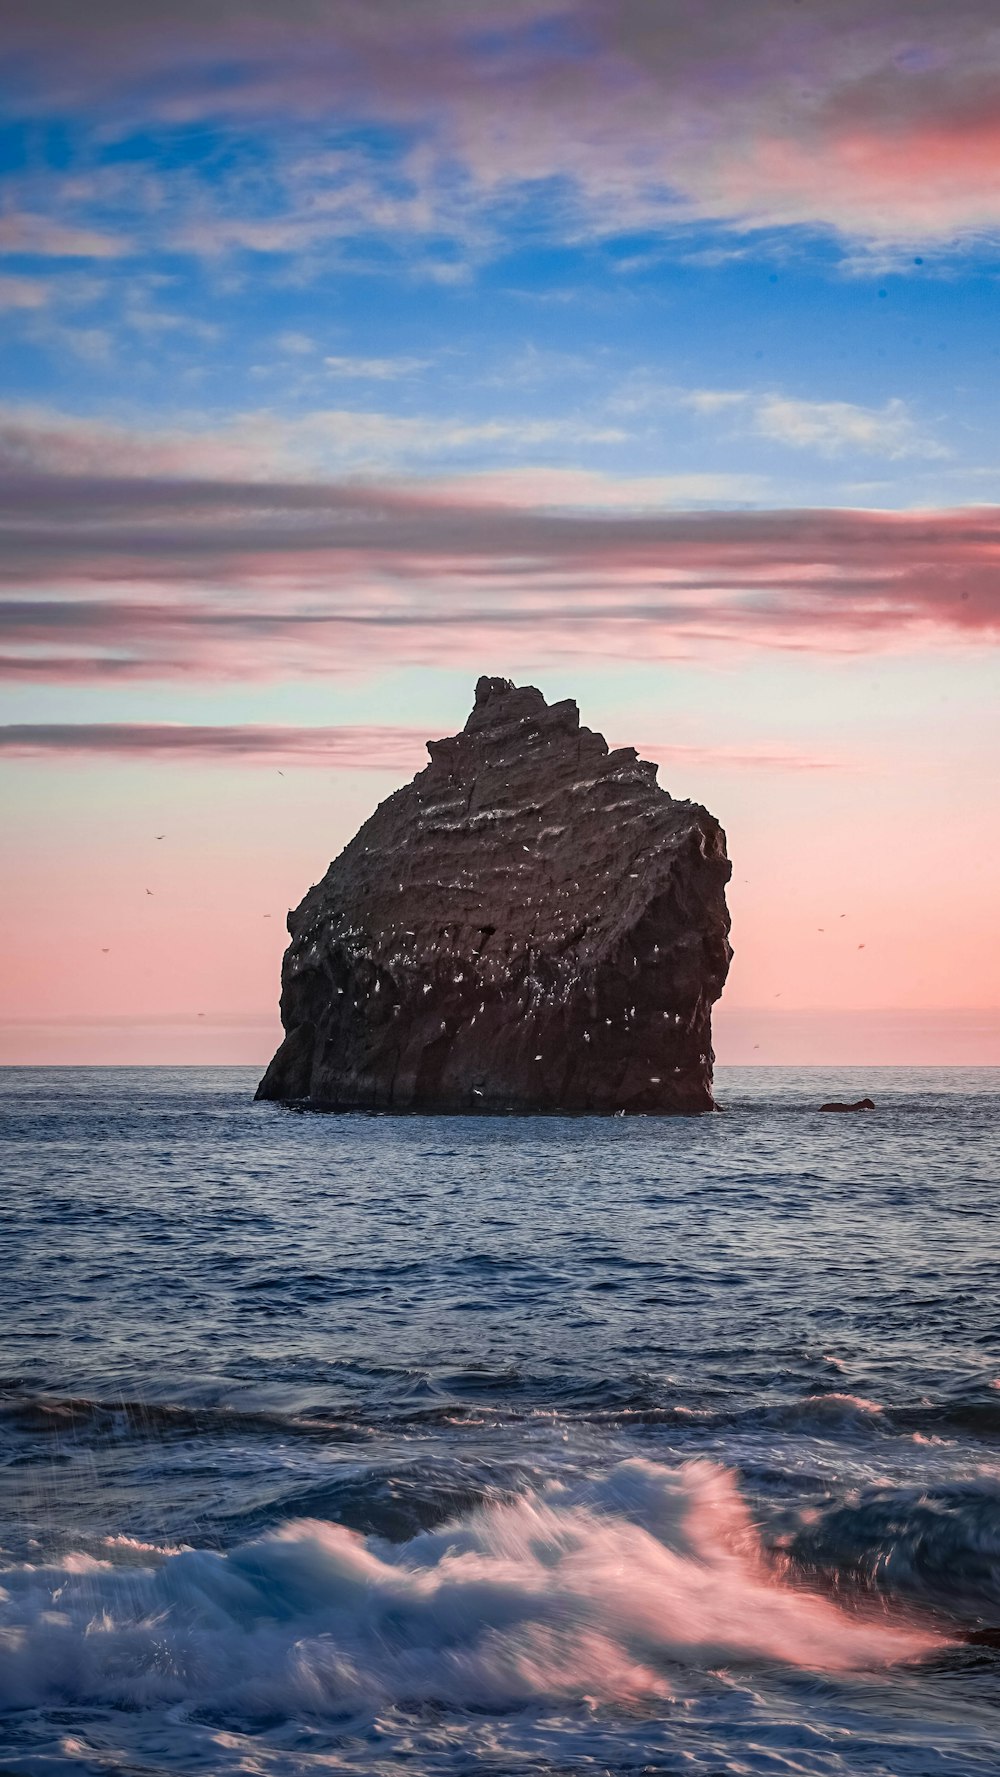 a large rock in the middle of the ocean